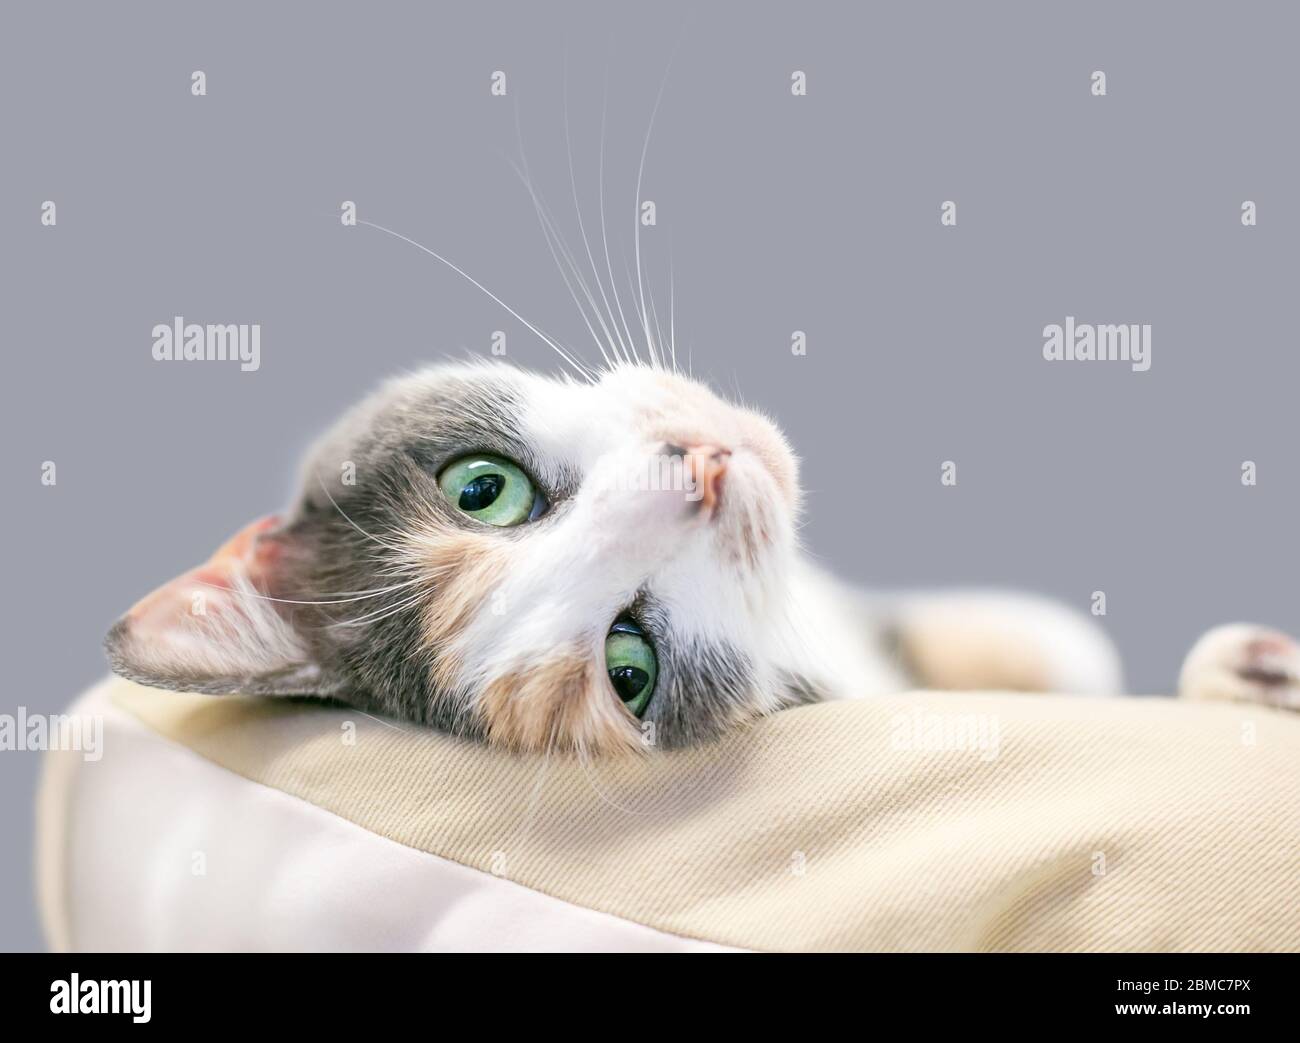 A Dilute Calico Domestic Shorthair Cat With Green Eyes Relaxing Upside Down In A Cat Bed Stock Photo Alamy